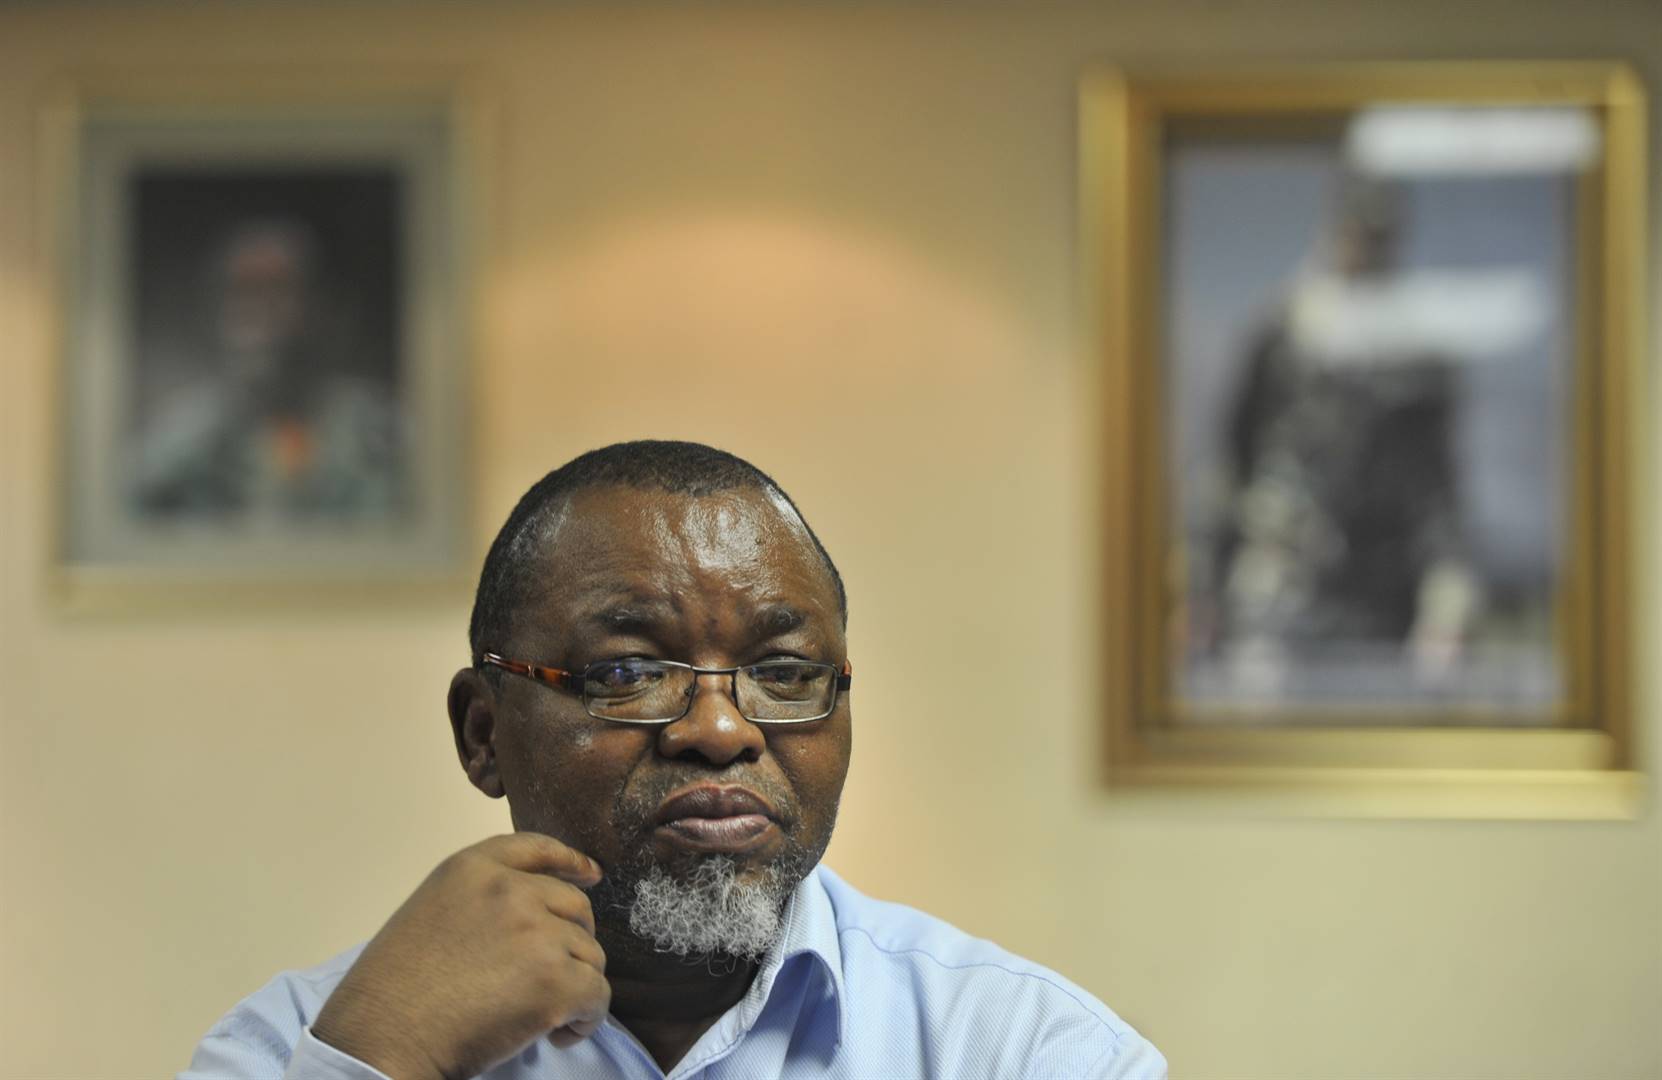 Eskom's response comes after Mantashe said on Thursday that the utility was dithering over the procurement of emergency power. 